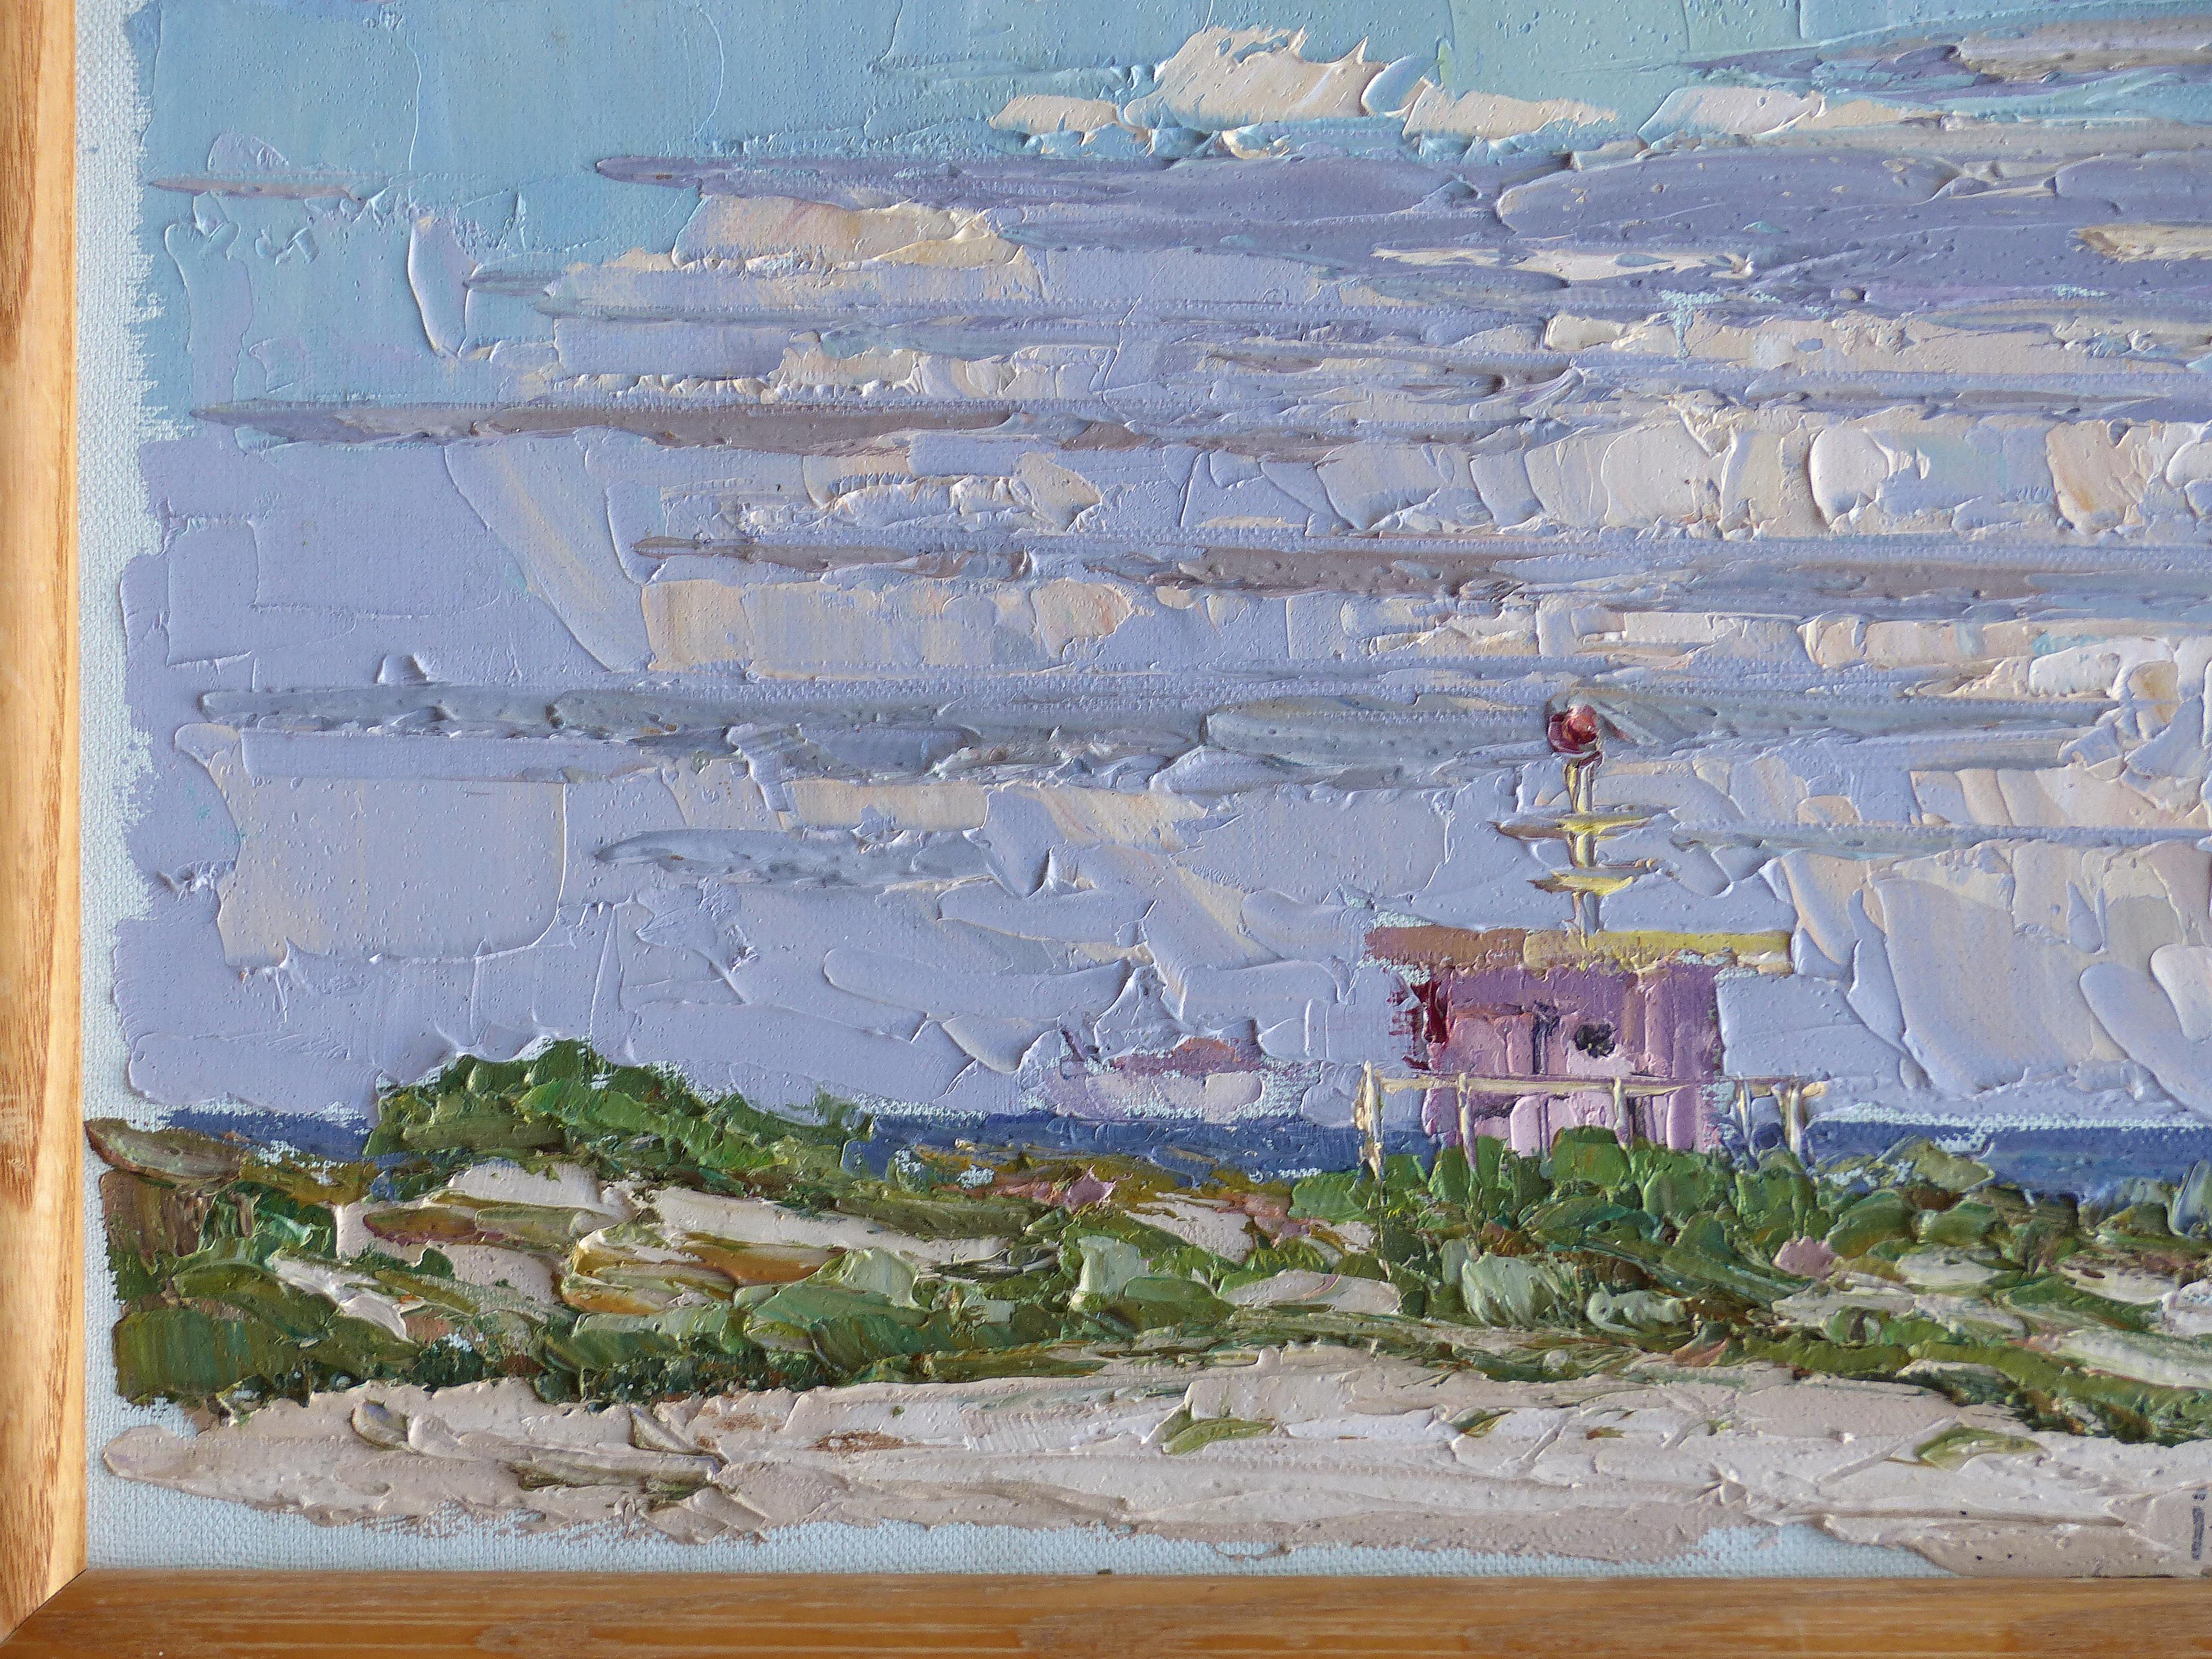 Igor Korotash Oil Painting on Canvas of Miami Beach ‘B1957 Russian/American’

Offered for sale is an oil on canvas by Russian American artist Igor Korotash. This painting has a great deal of texture achieved with the use of a palette knife. Signed